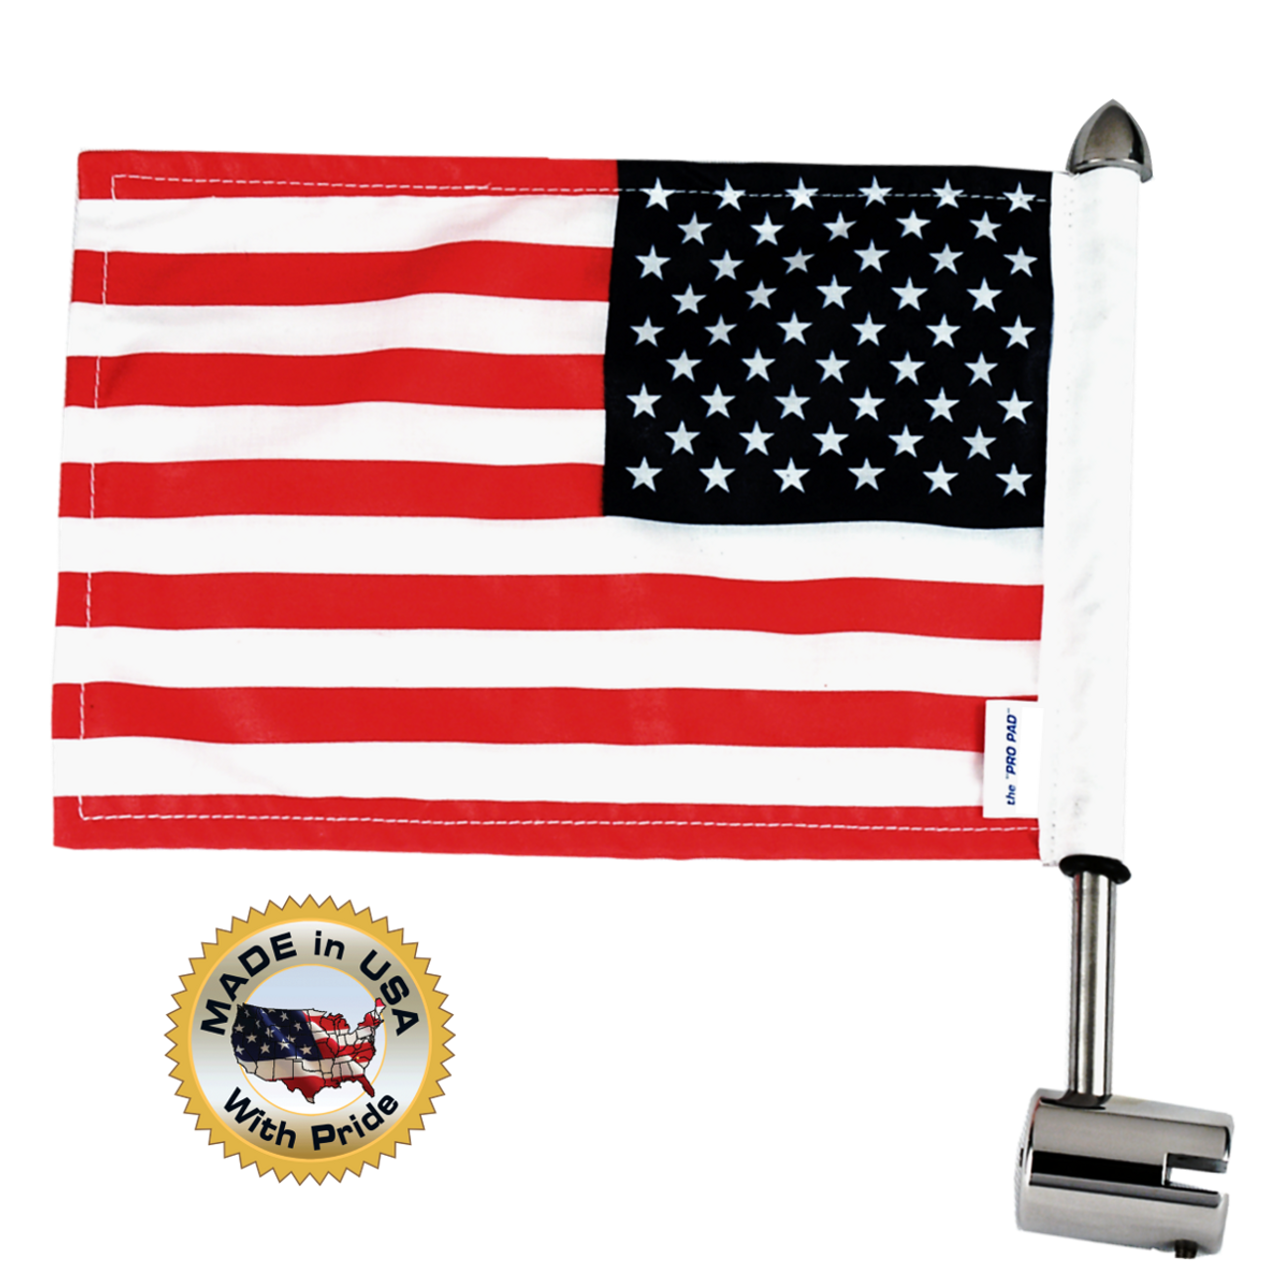 Fits 3/8 Flag Mount Poles Pro Pad FLG-USA15 Sleeved 10 by 15-inch Motorcycle Flag with 1/2 Sleeve United States of America Made in The USA 